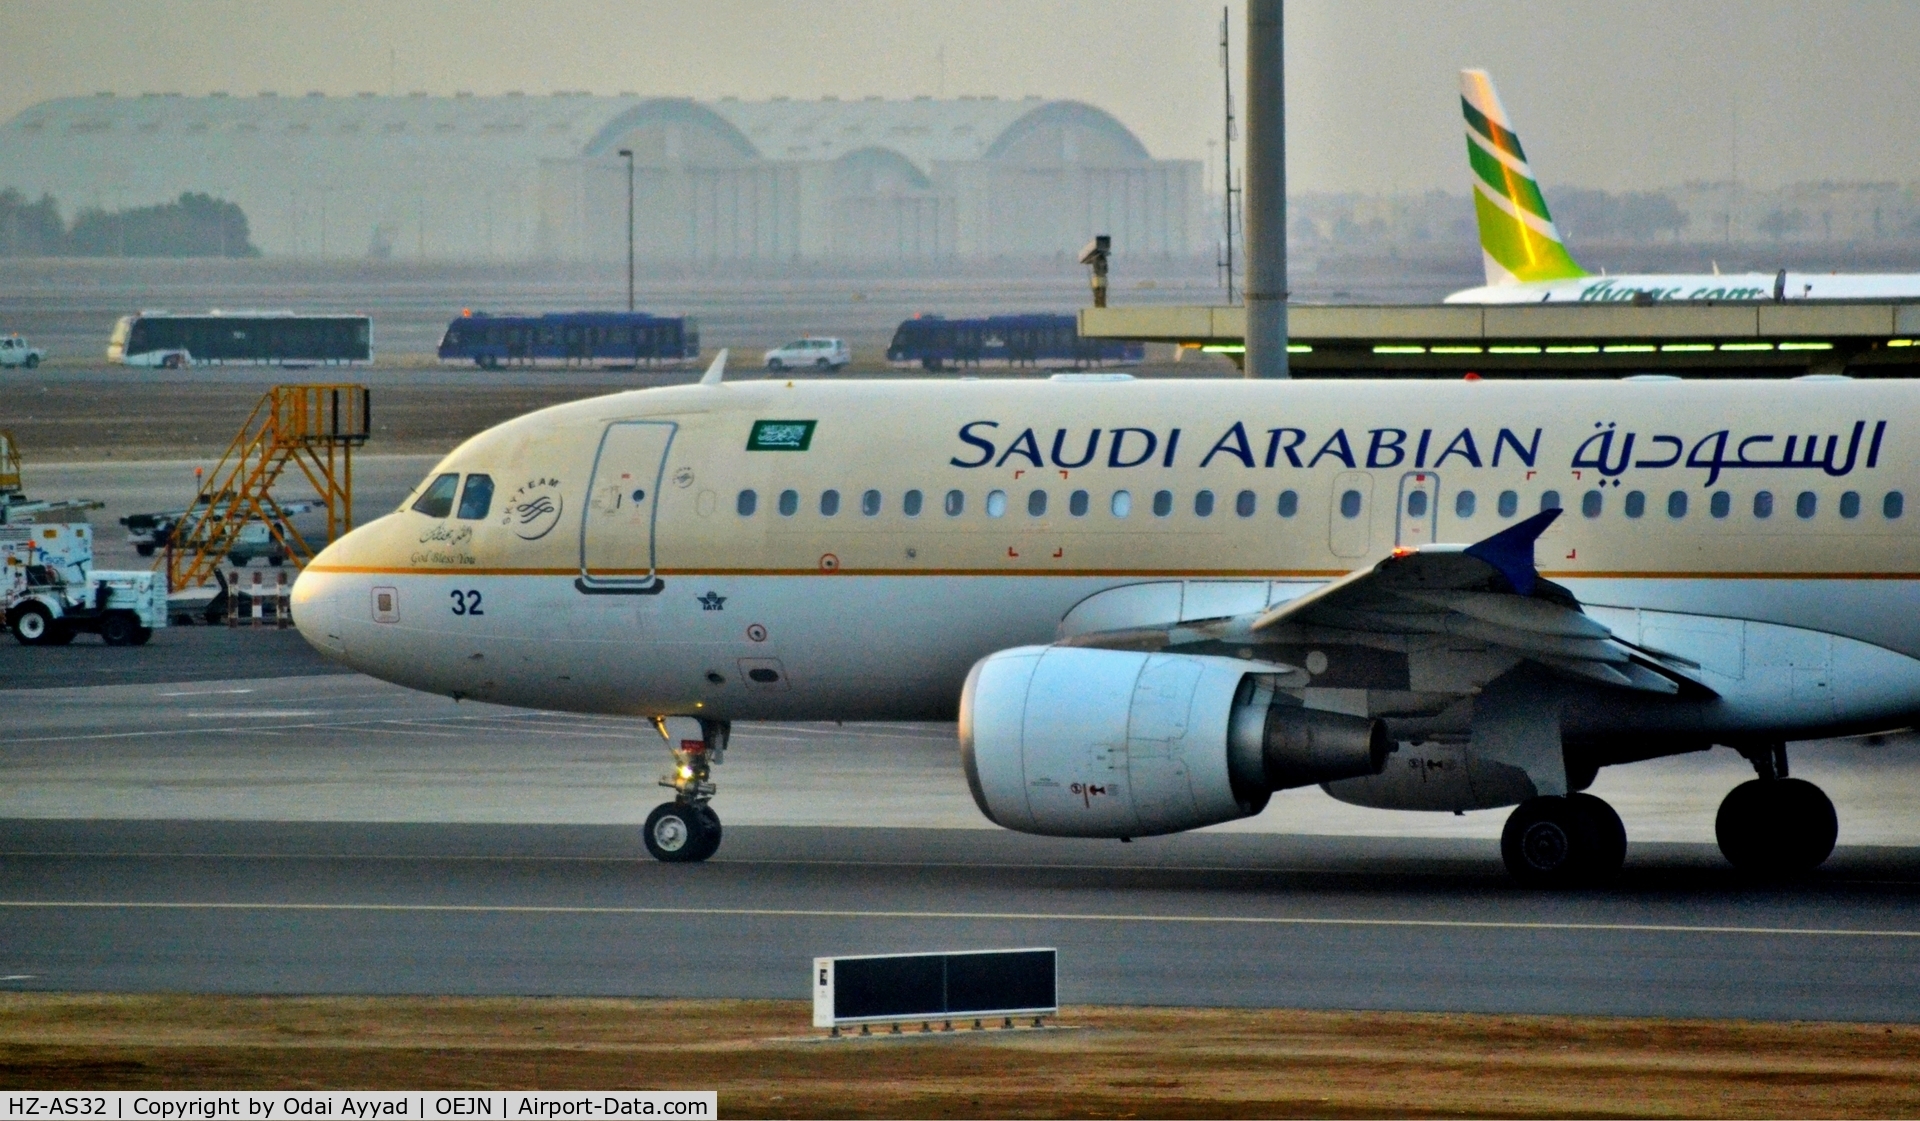 HZ-AS32, 2010 Airbus A320-214 C/N 4273, Taxing out to runway 34L at jeddah for takeoff